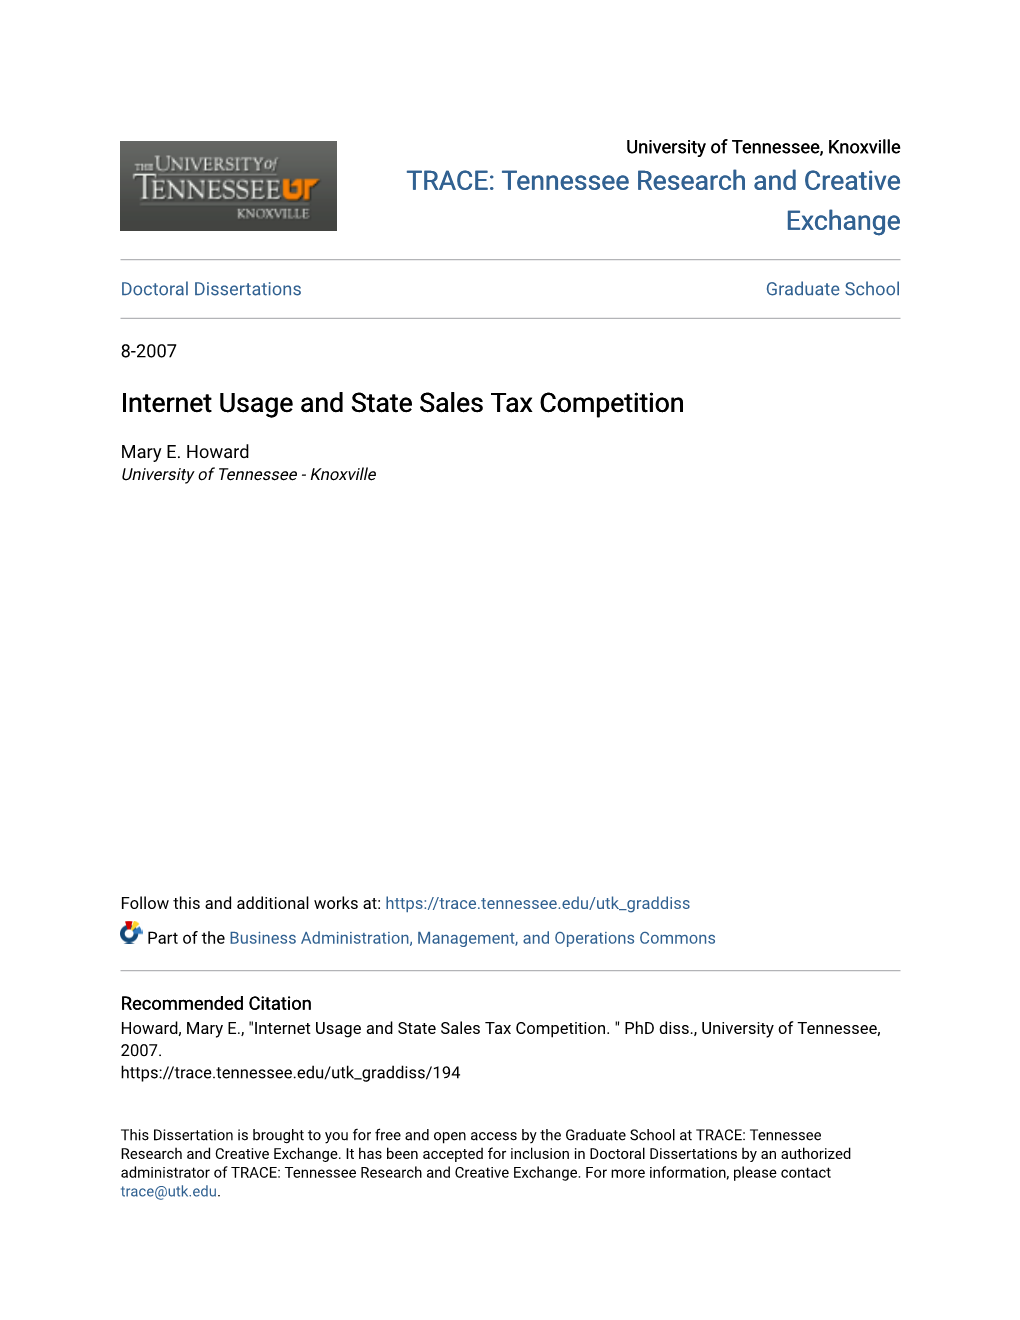 Internet Usage and State Sales Tax Competition